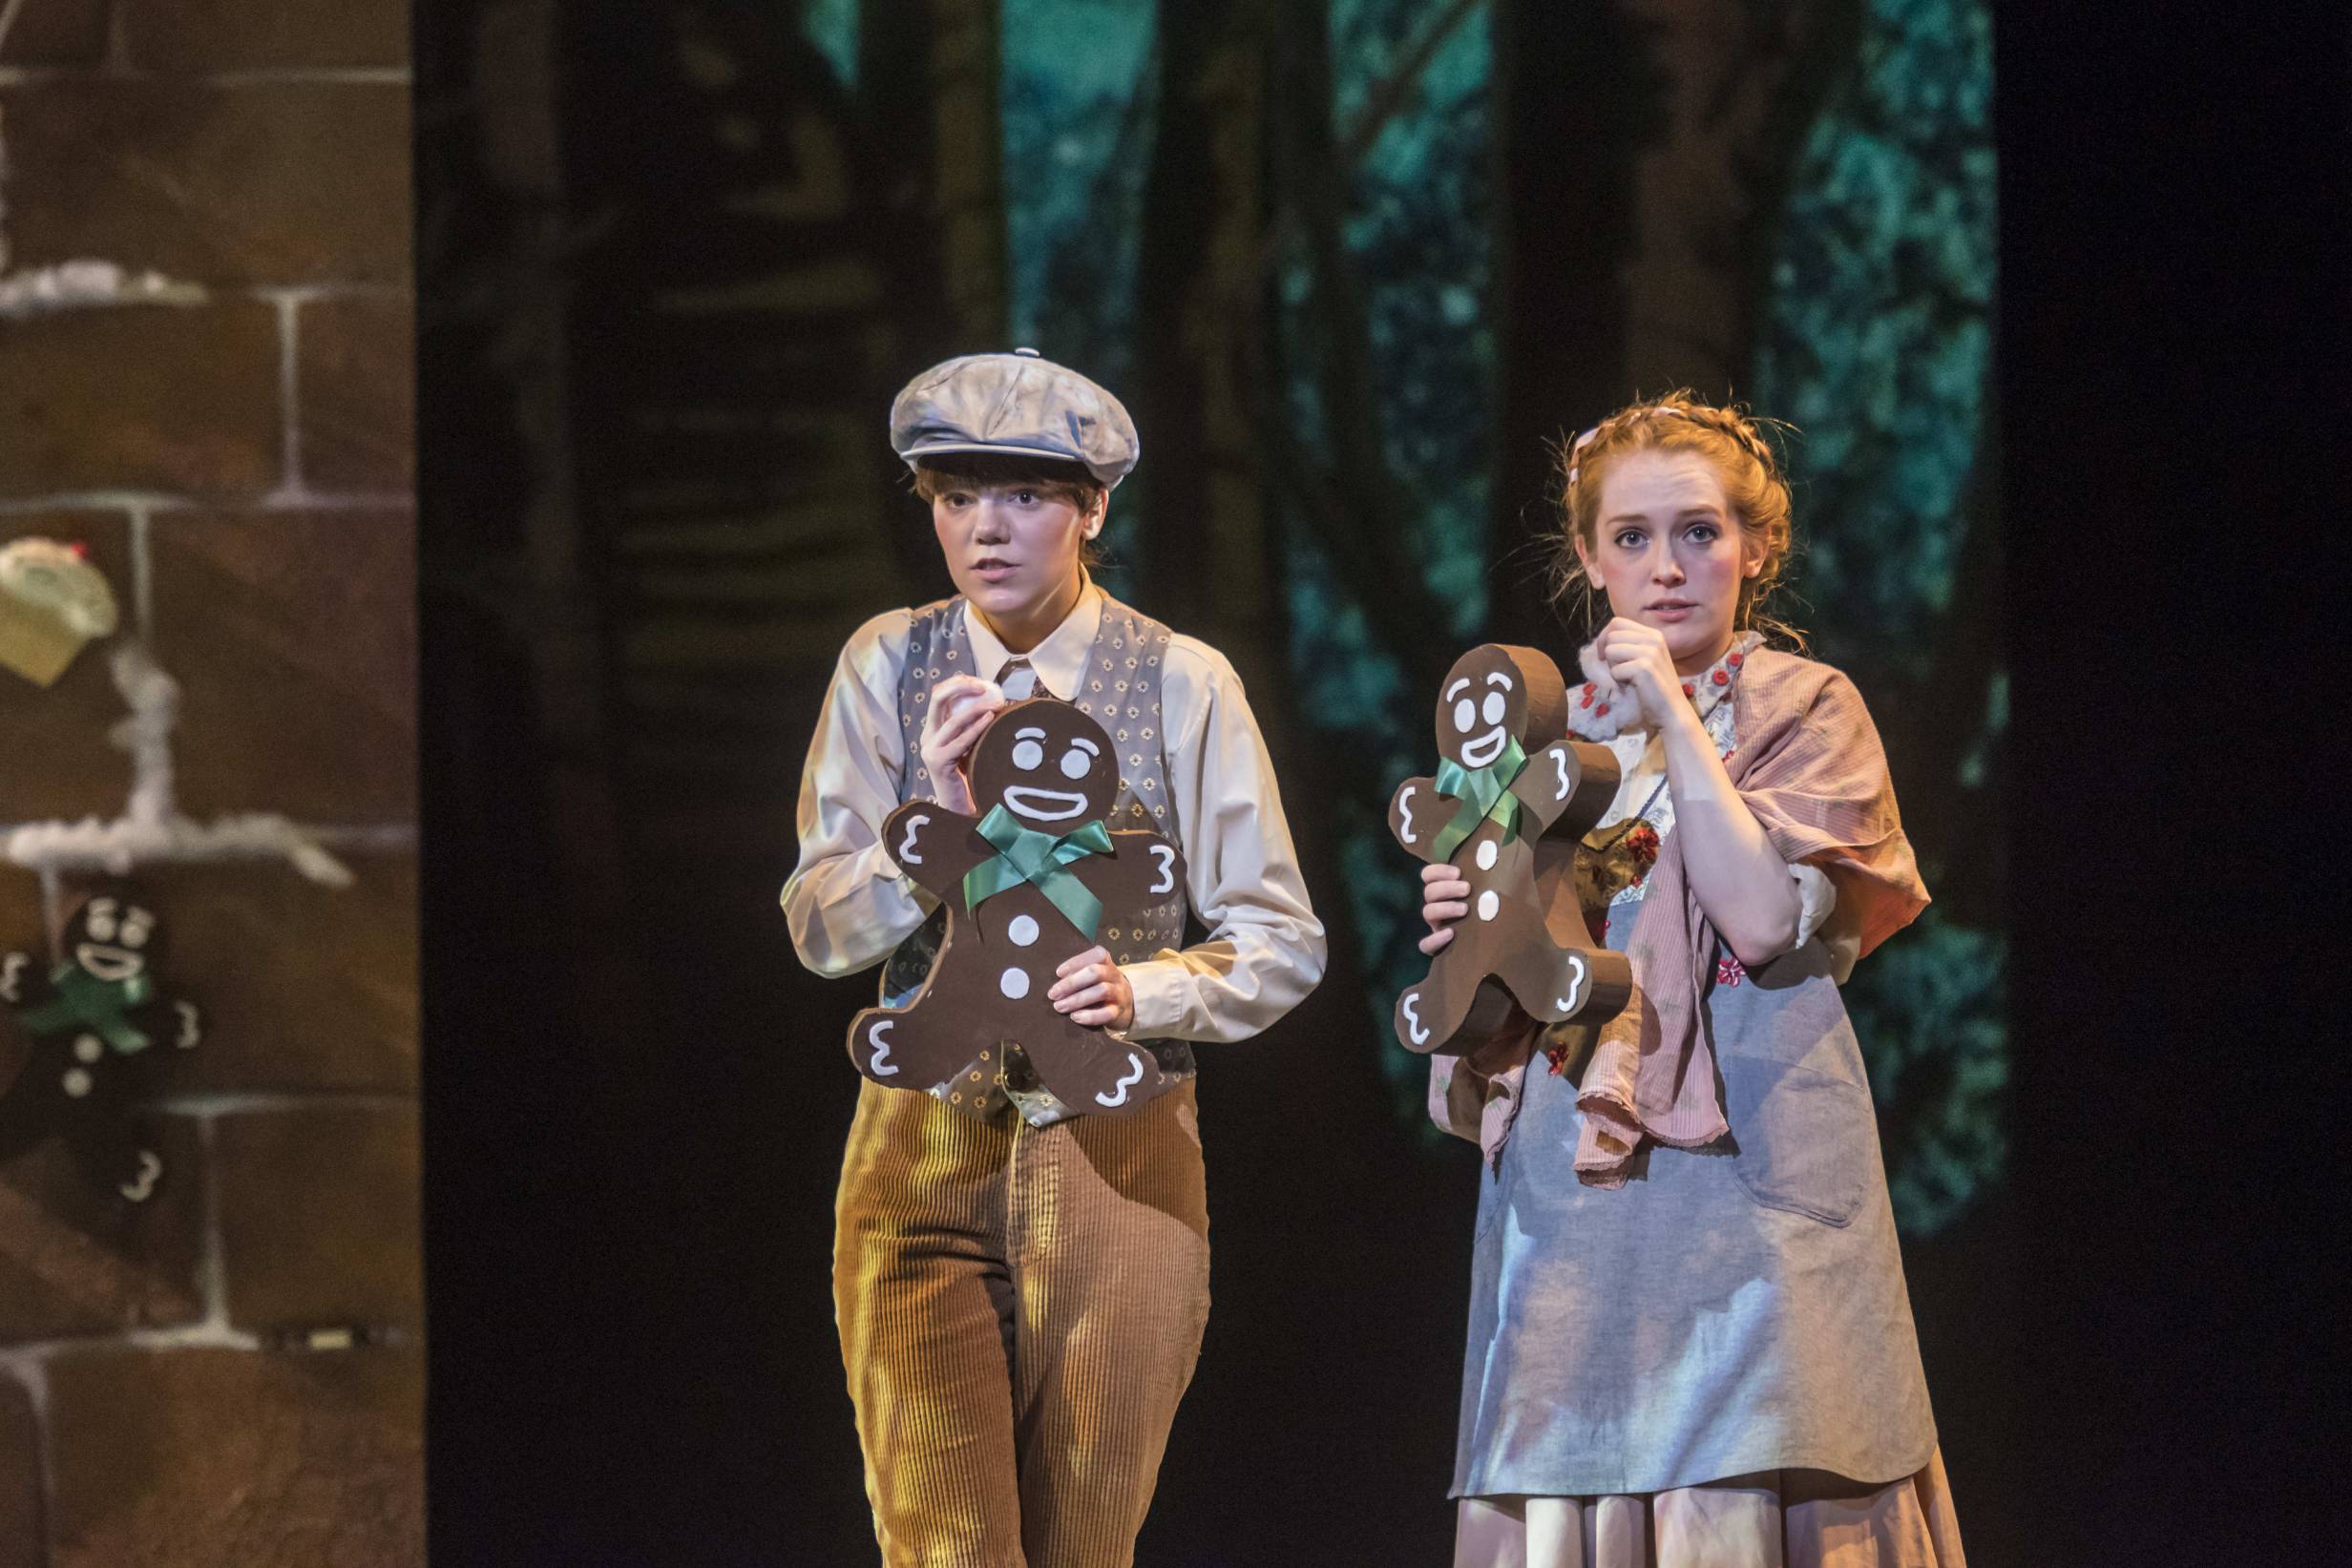  Hansel and Gretel brings a sweet tale to life